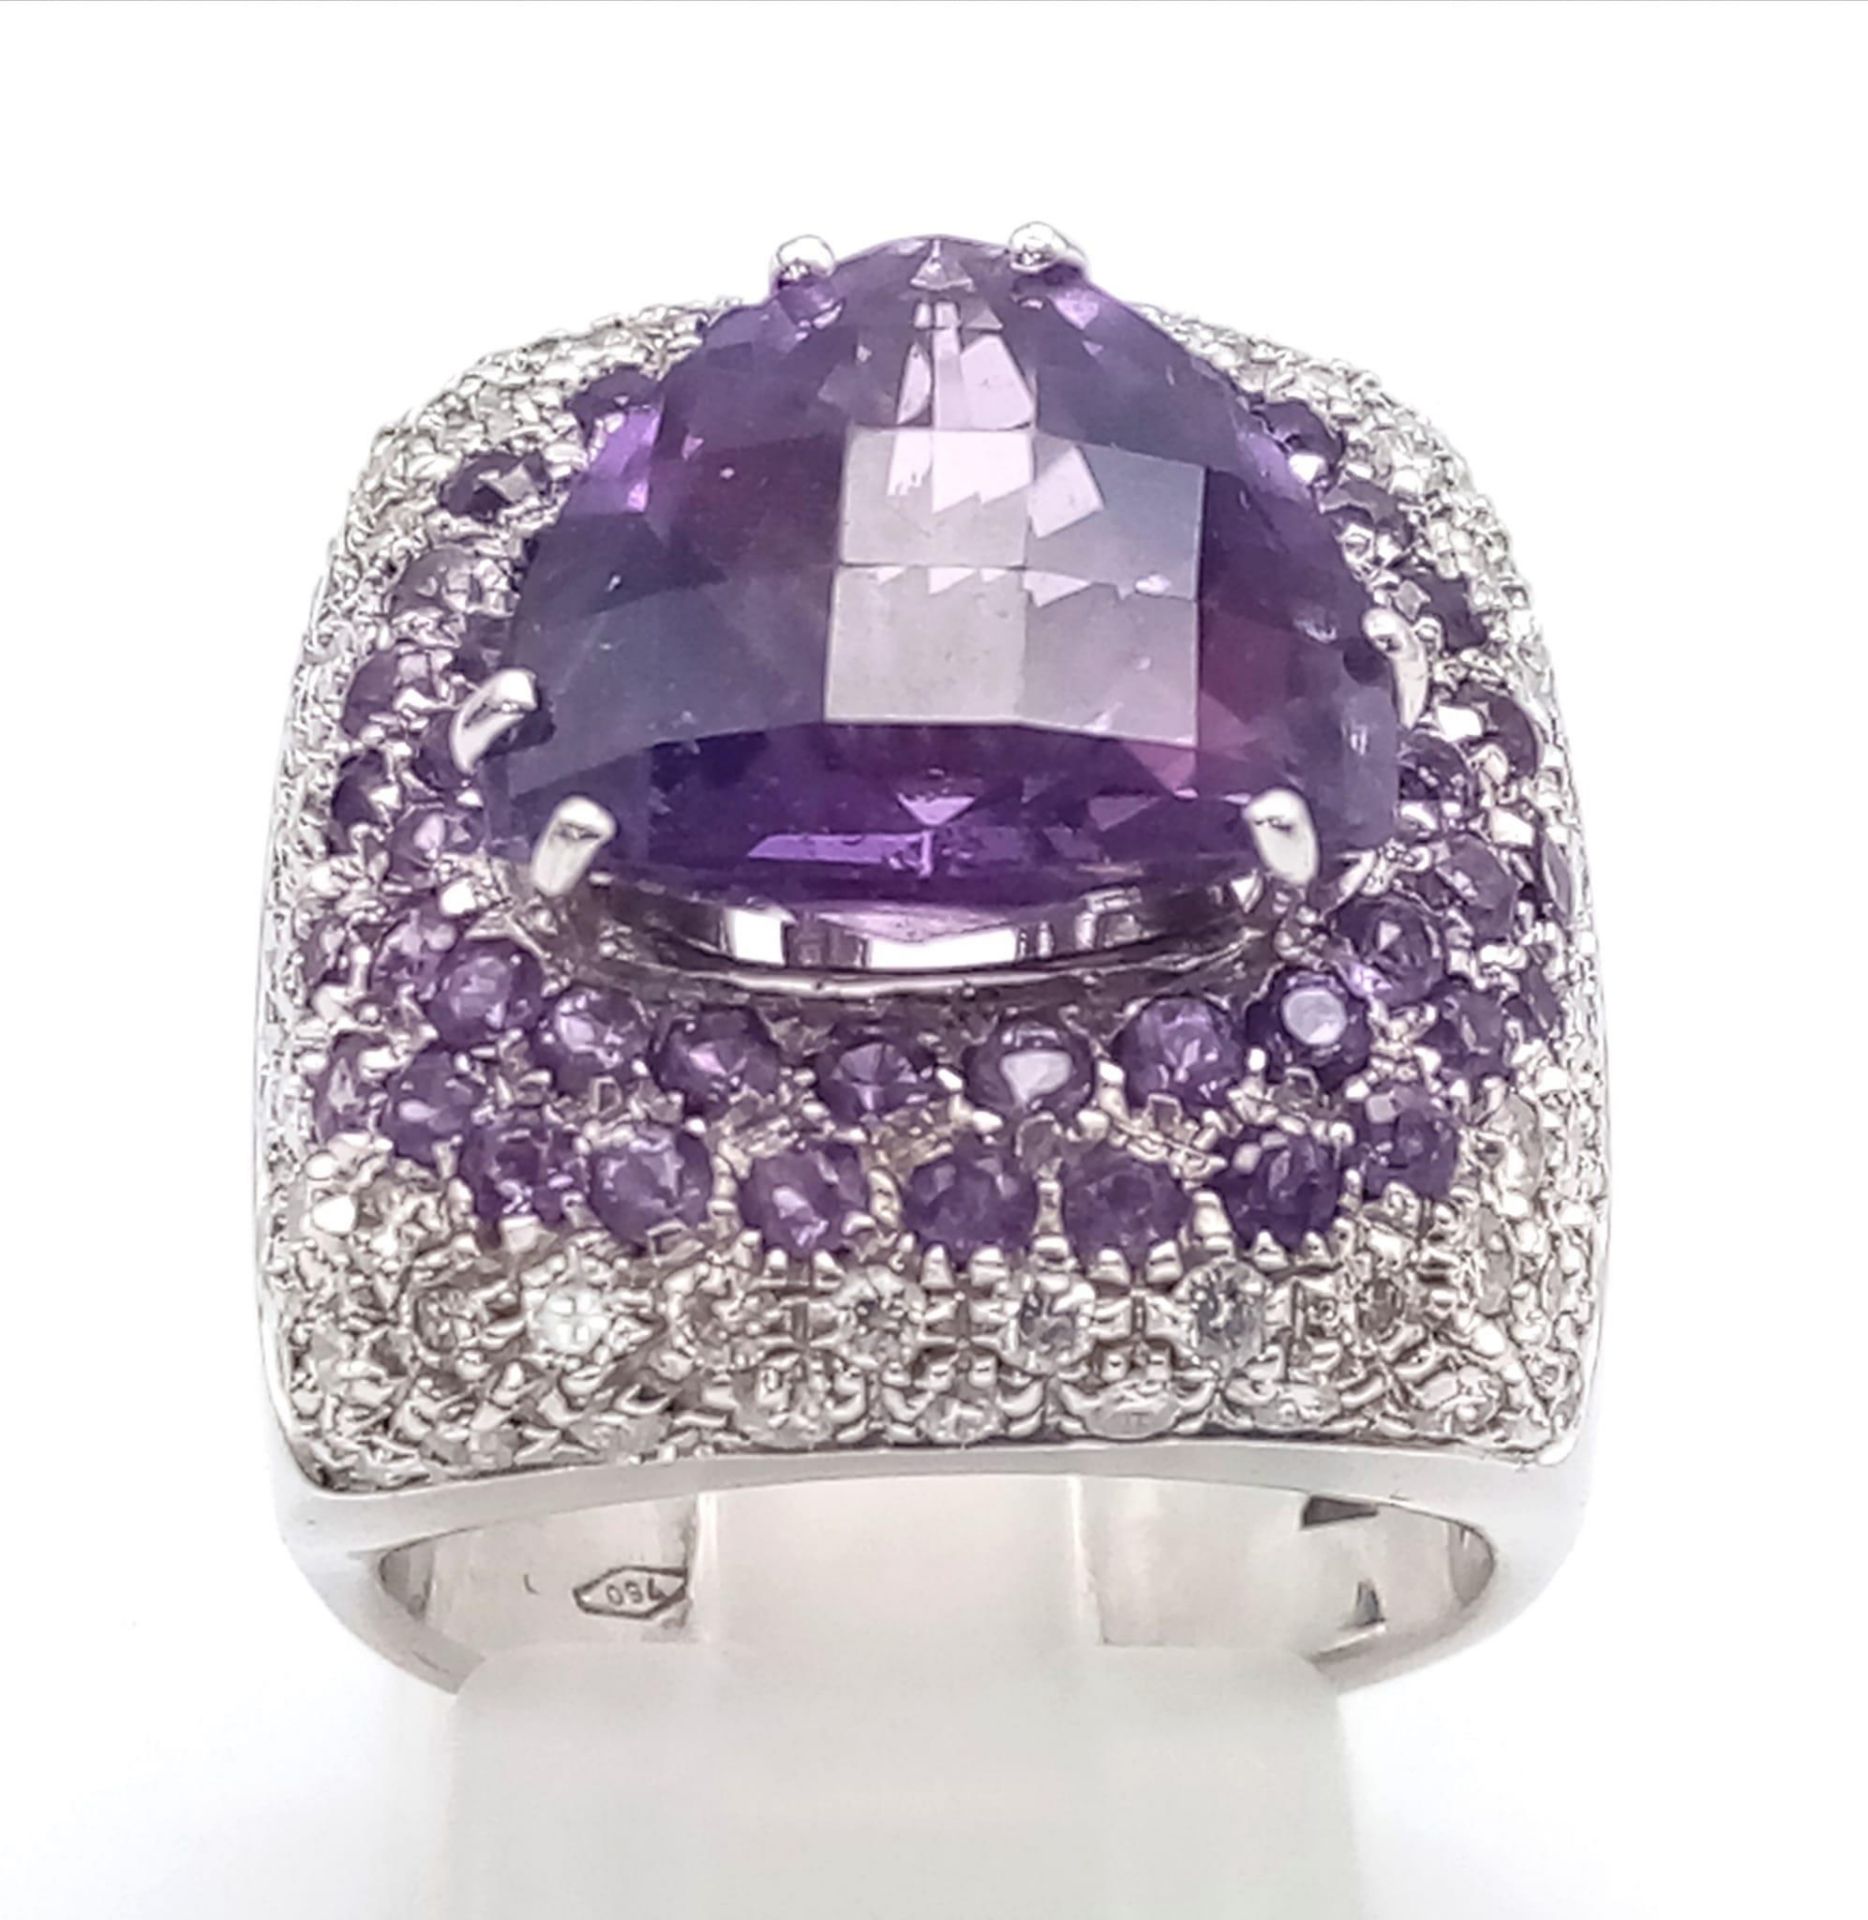 A FABULOUS 18K WHITE GOLD DIAMOND AND AMETHYST RING WITH MATCHING EARRINGS . 35.5gms - Image 3 of 12